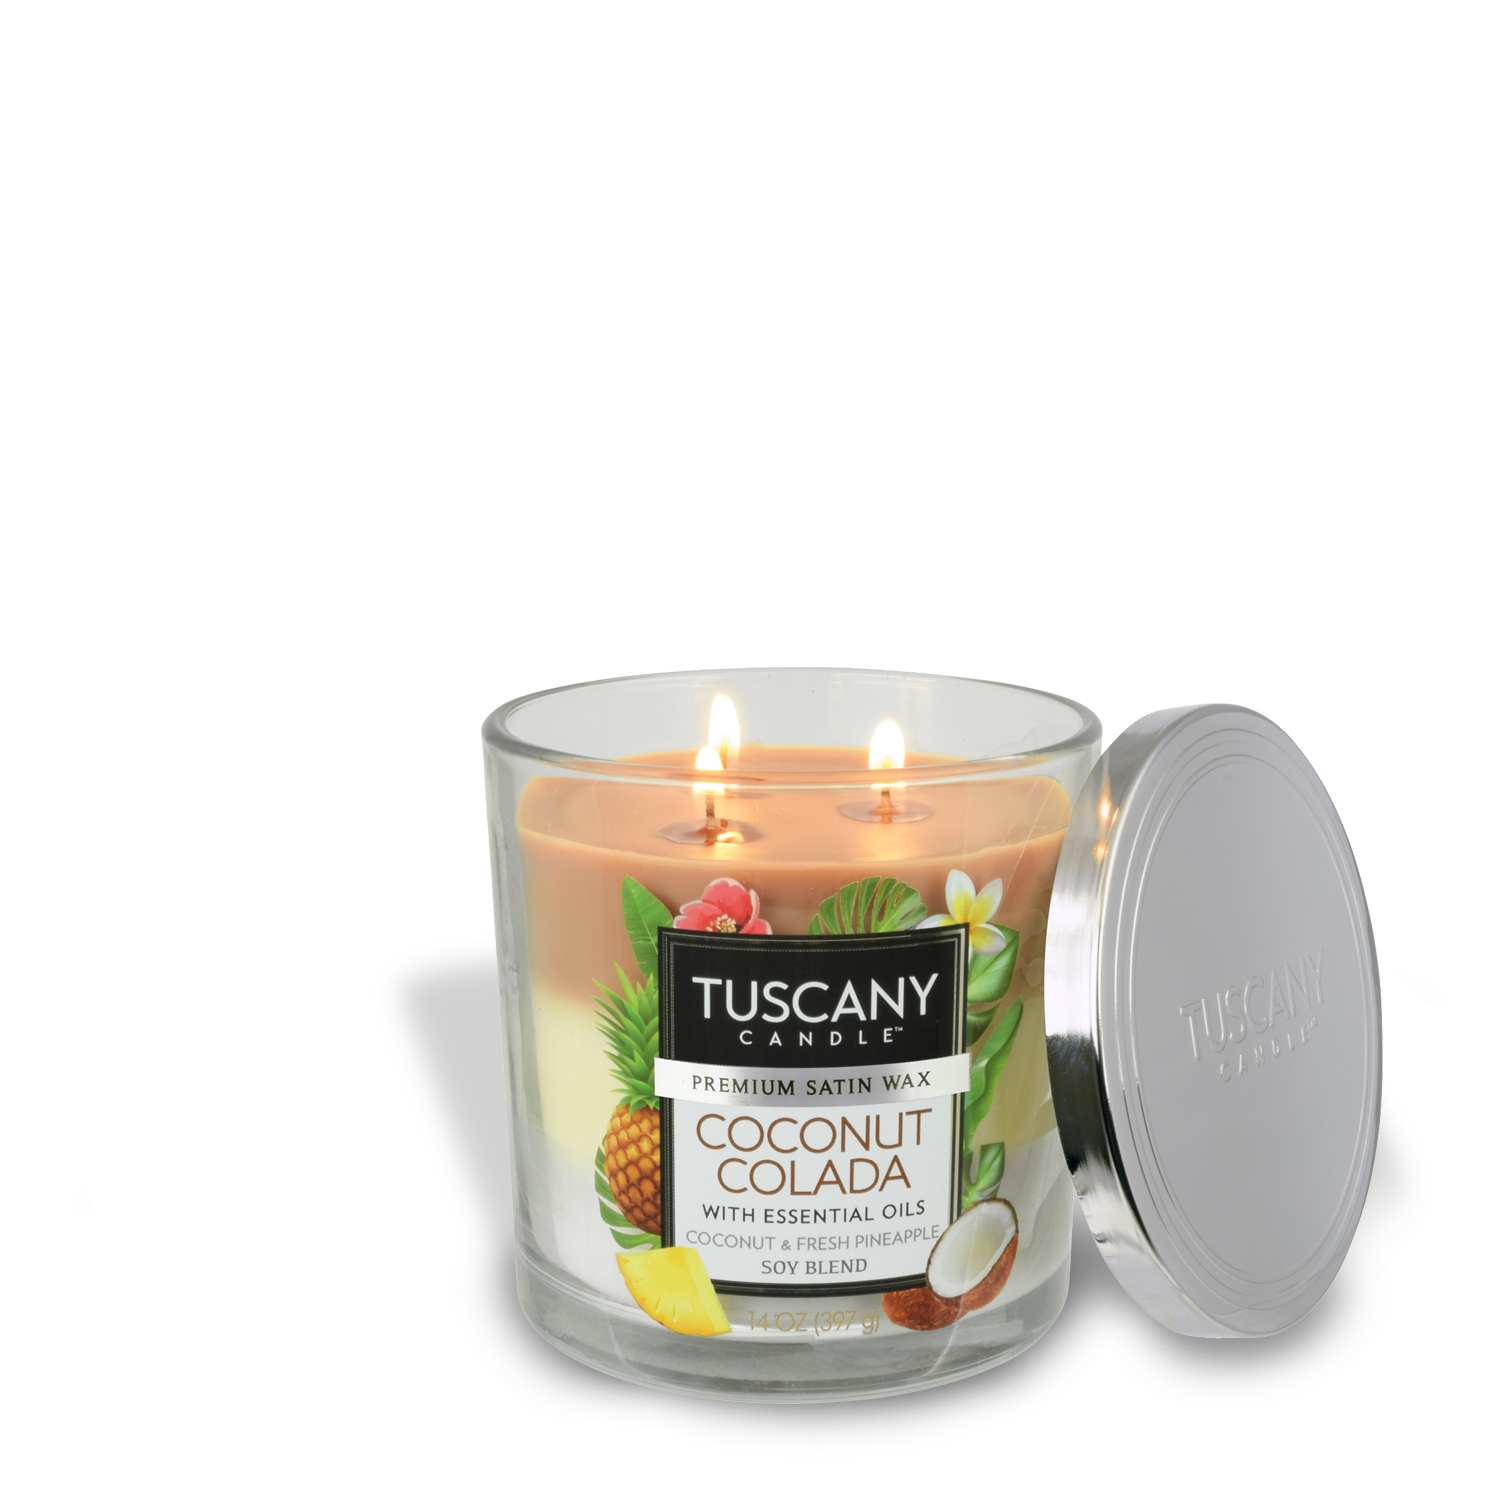 Immerse yourself in a tropical getaway with this Tuscany Candle Coconut Colada Long-Lasting Scented Jar Candle (14 oz).